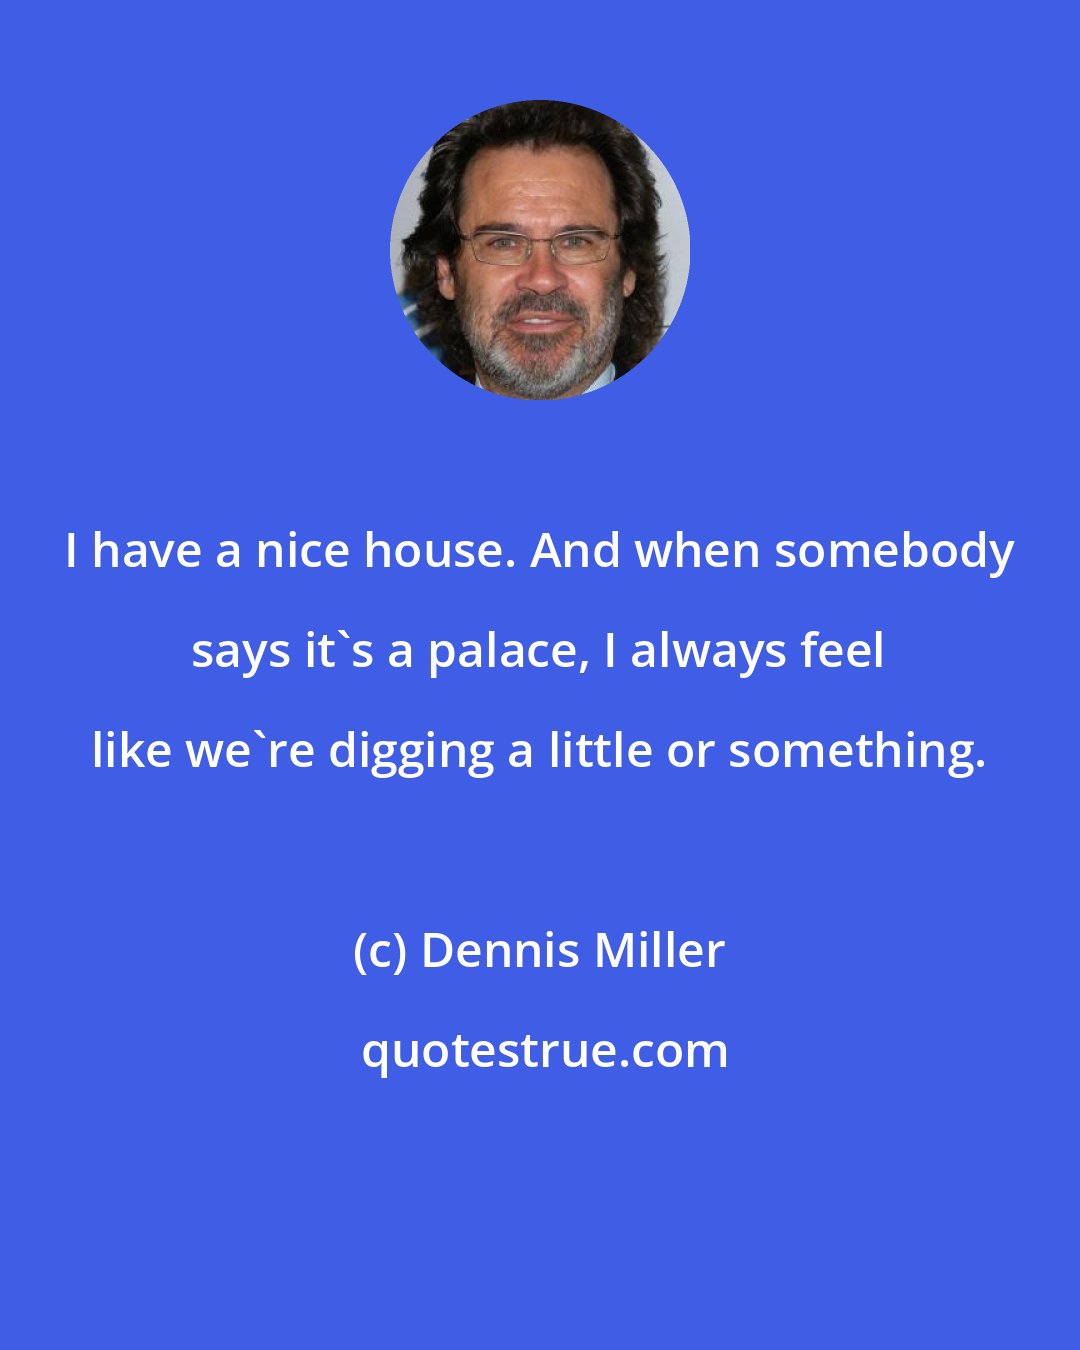 Dennis Miller: I have a nice house. And when somebody says it's a palace, I always feel like we're digging a little or something.